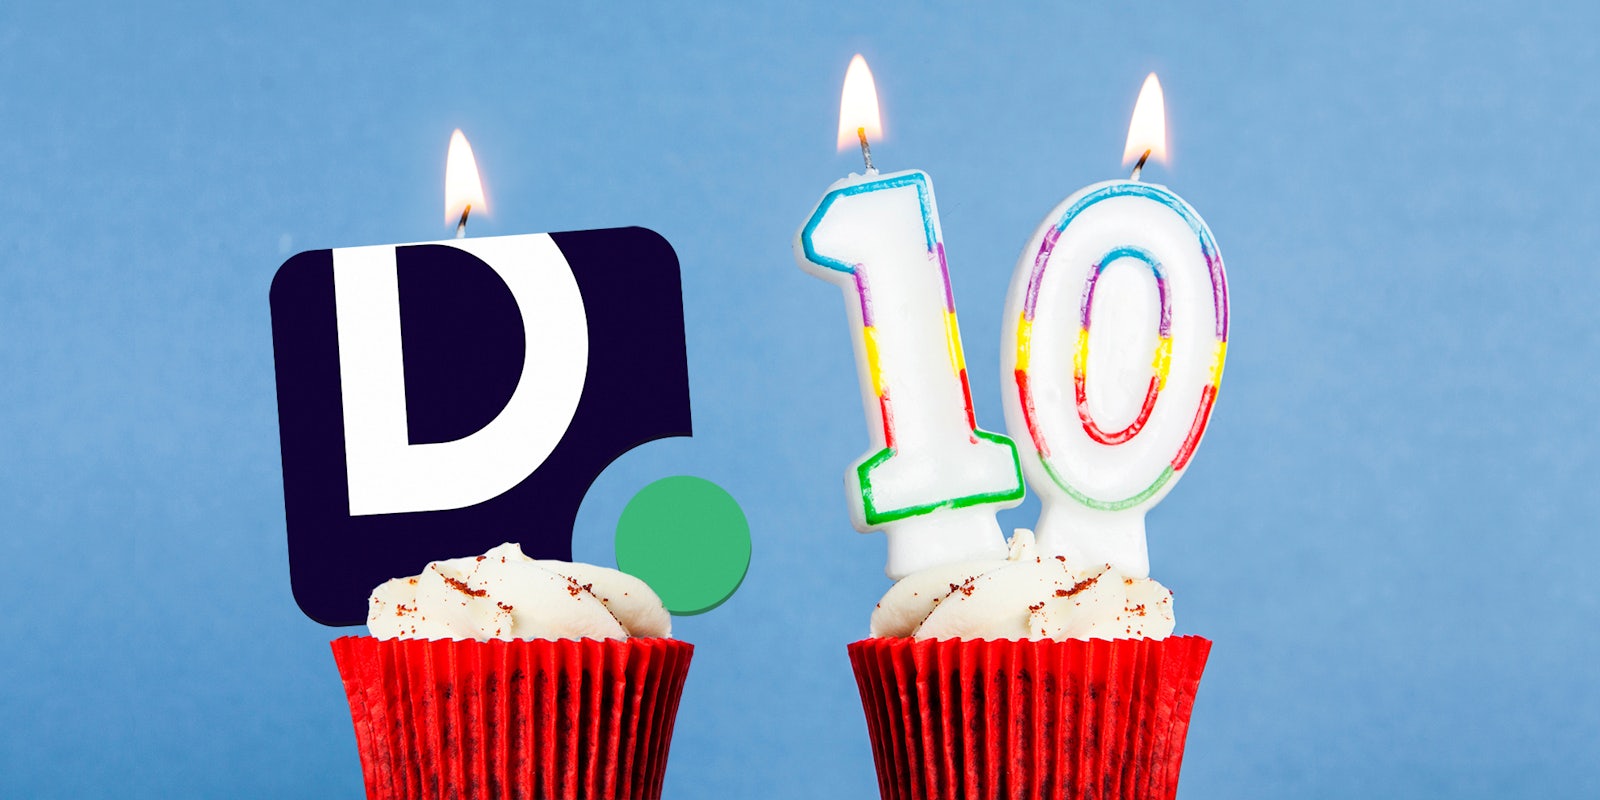 Daily Dot logo candle and Number 10 birthday candle in cupcakes against a blue background